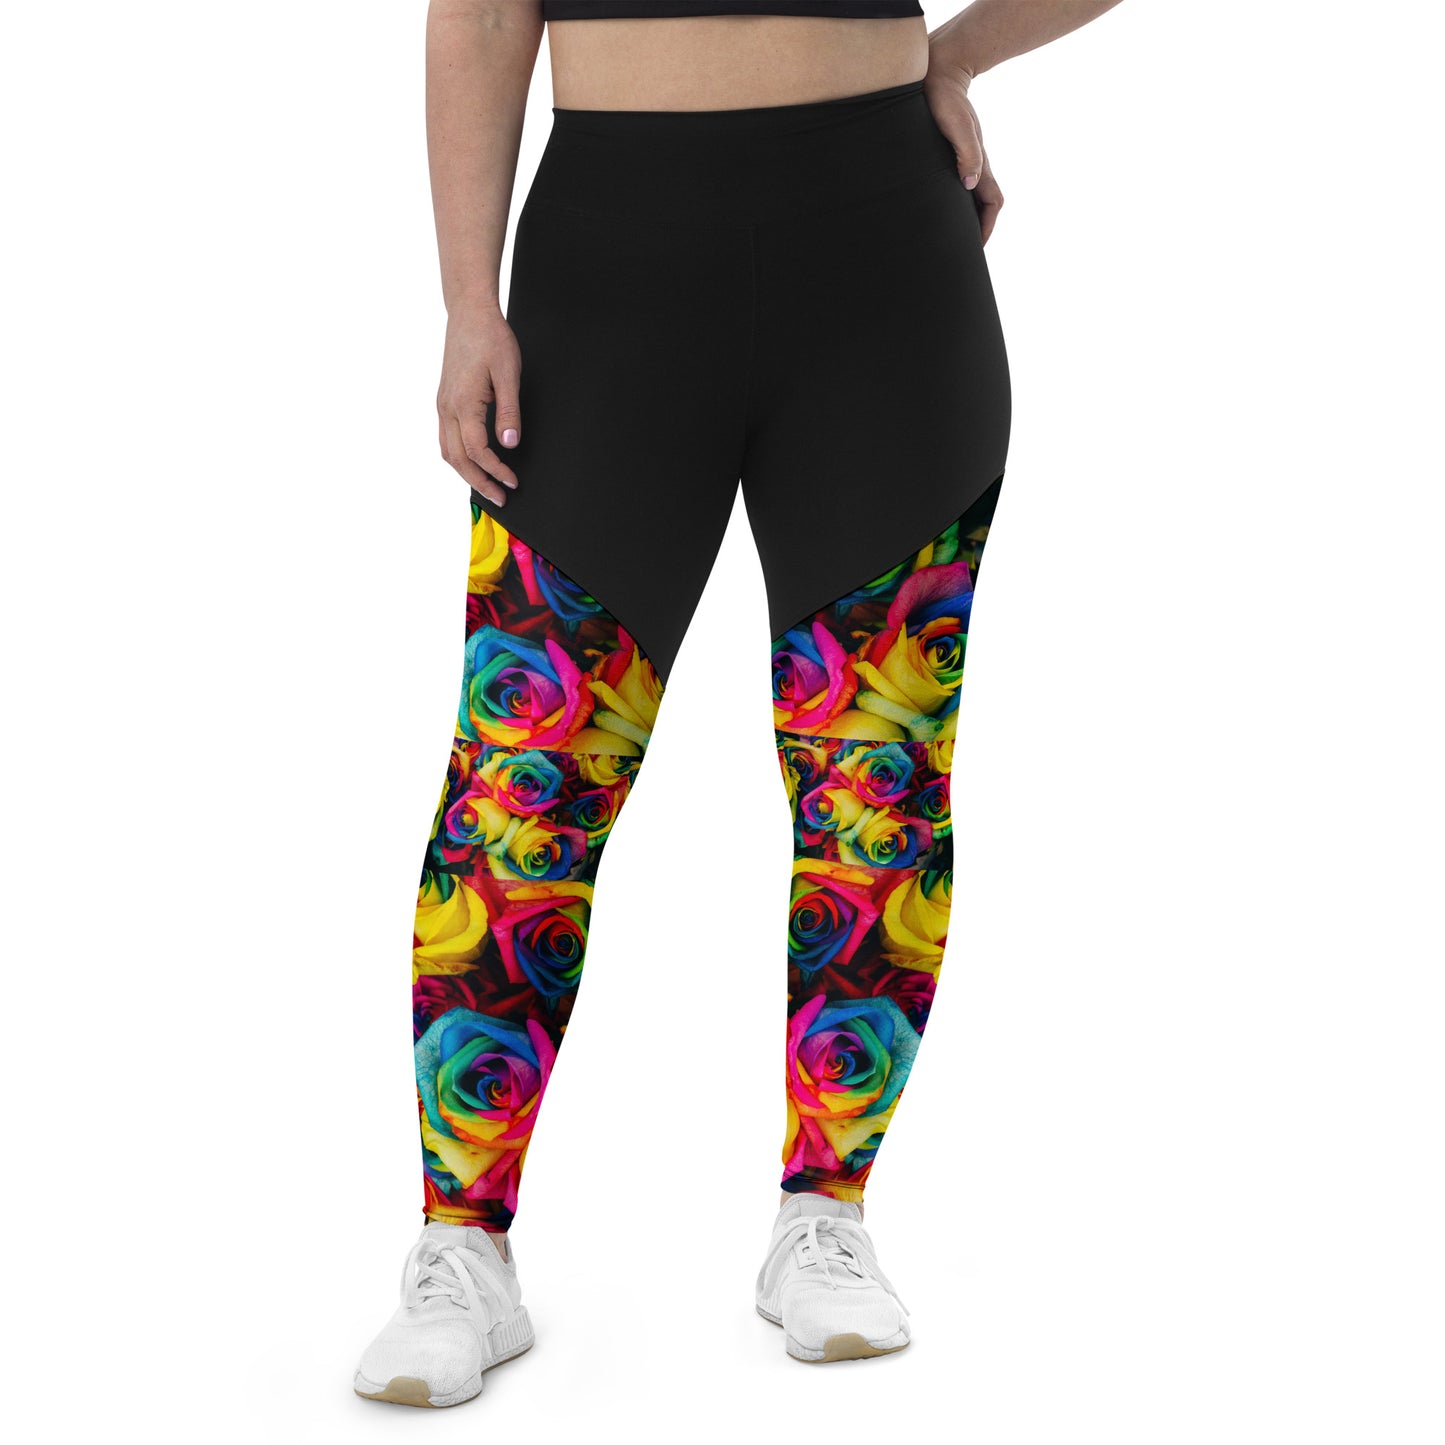 Emote Merch from SpotlYght Seeker - from the Bravo and Roses Collection the Moonlight & Roses Sports Leggings Plus Size for the Female  Artist because artists deserve praise.